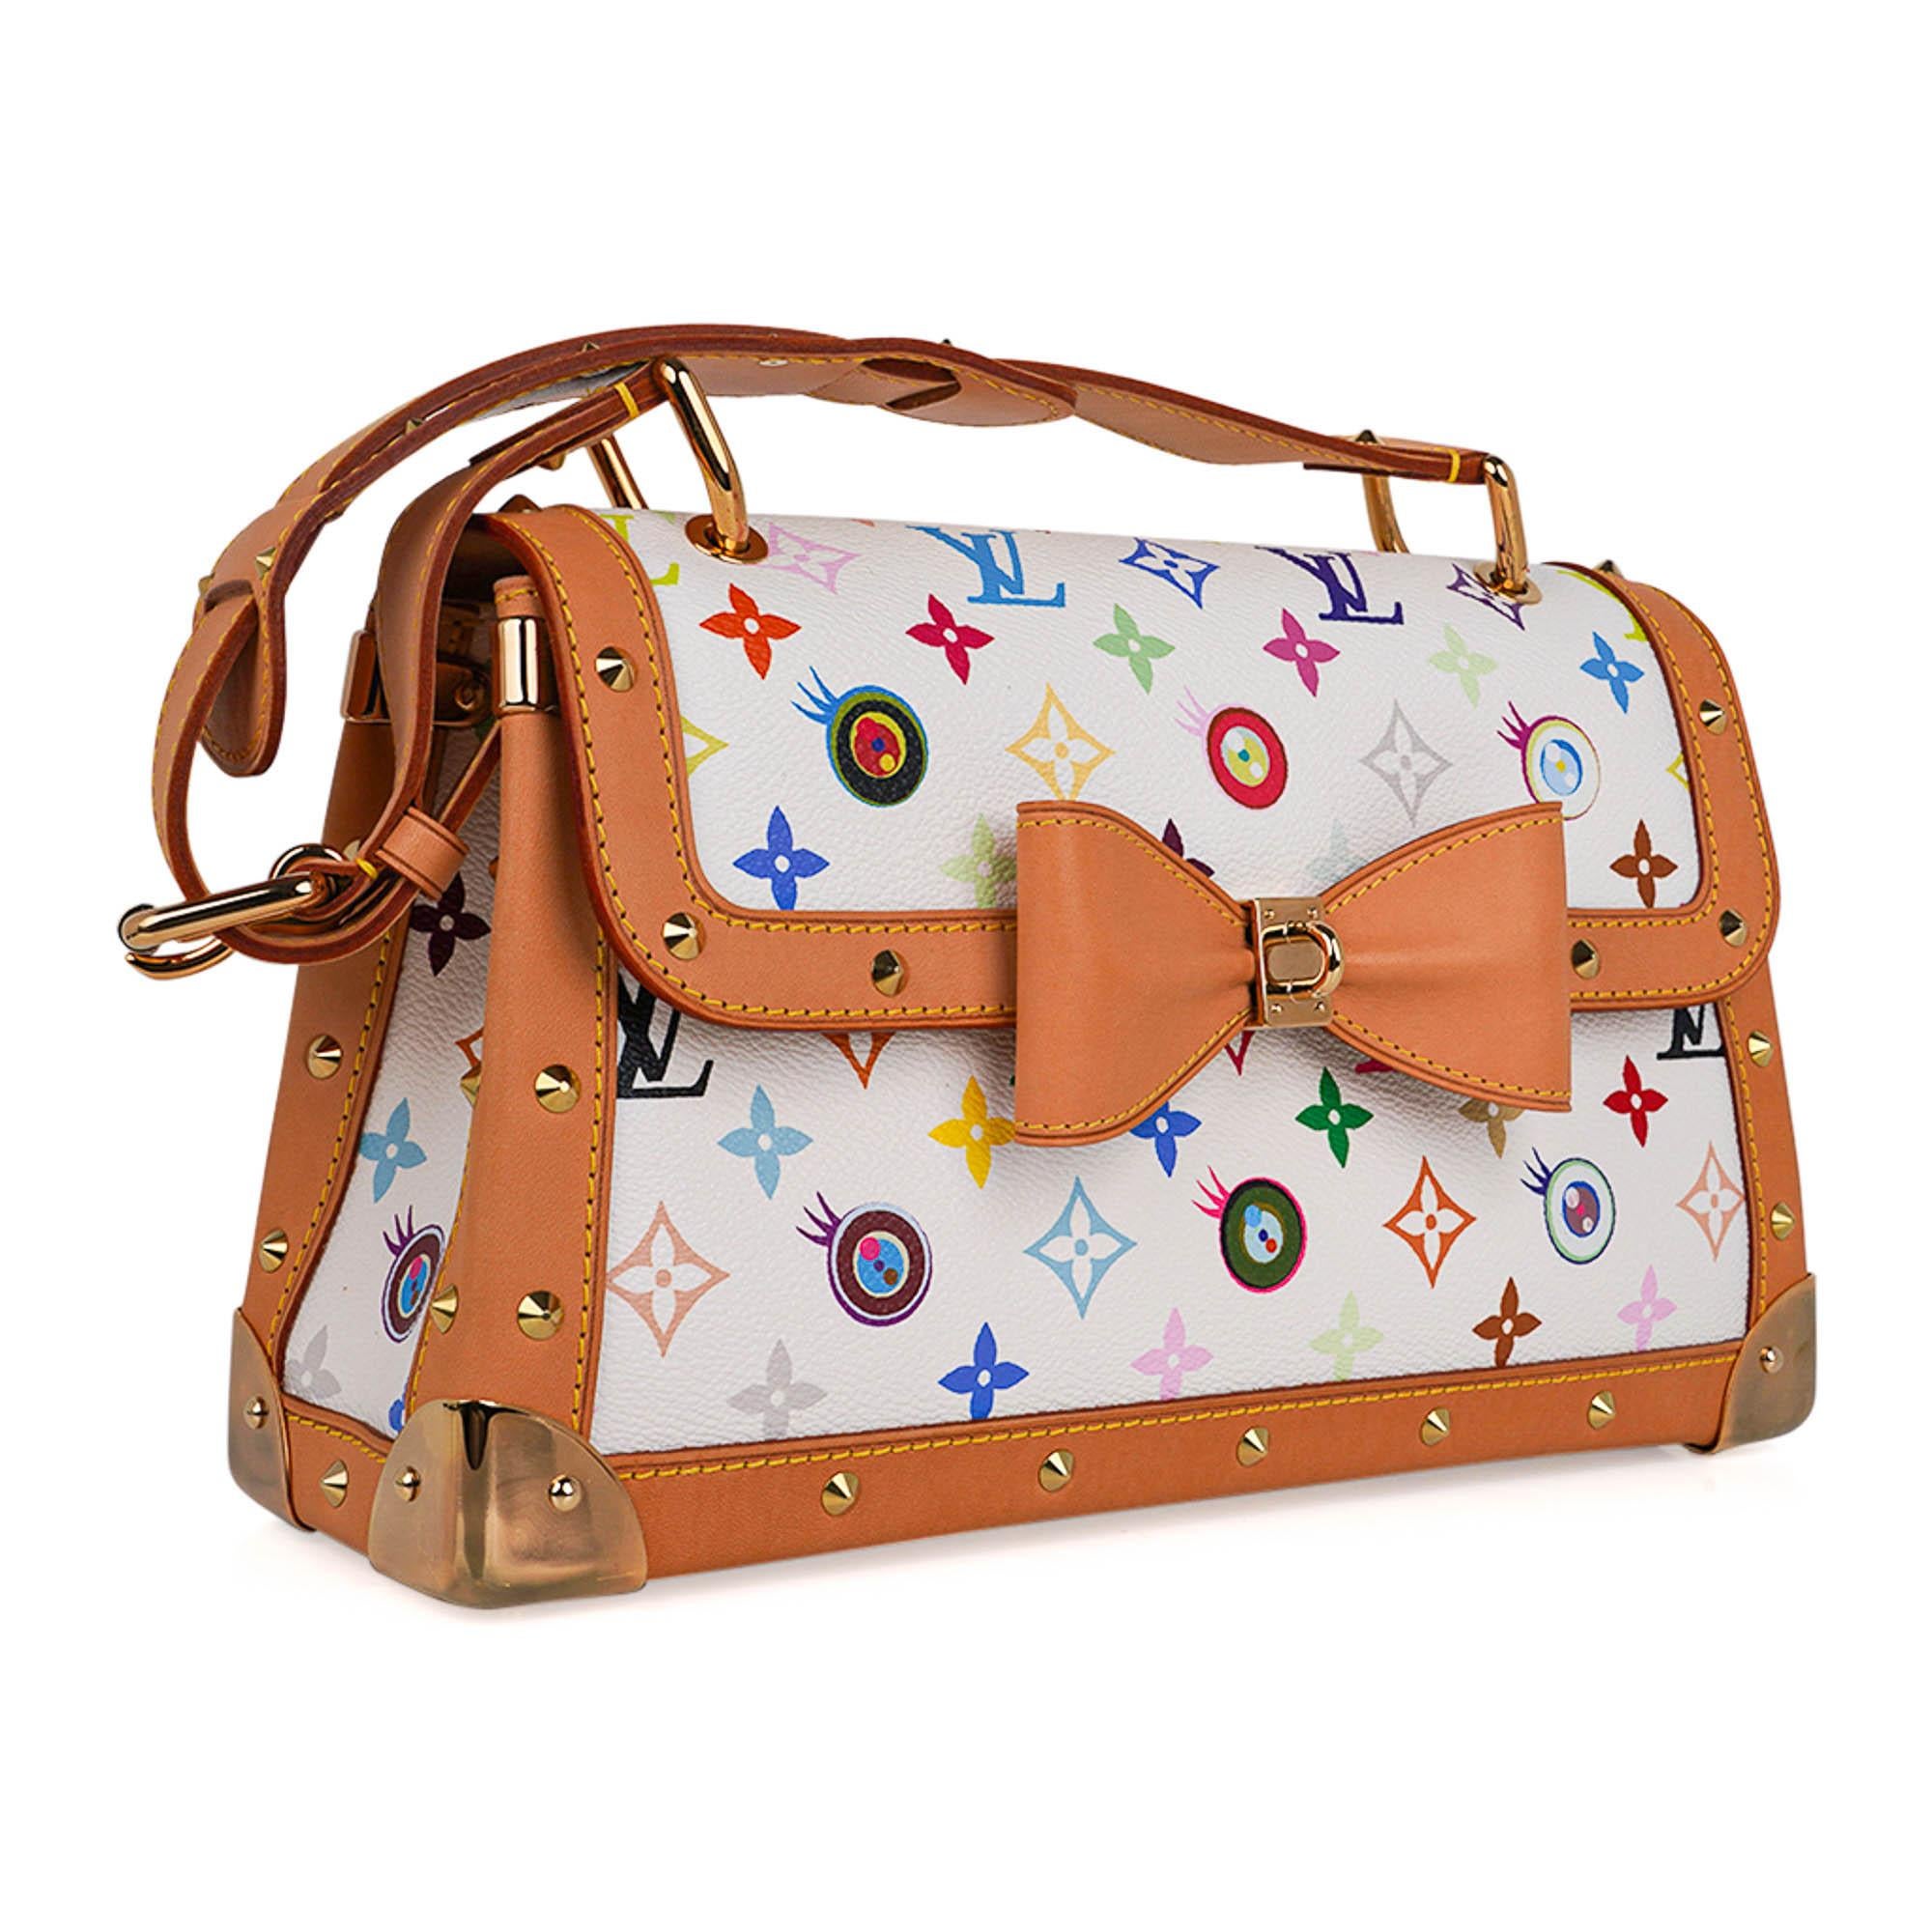 Mightychic offers a Louis Vuitton Limited Edition Murakami Eye Need You Bag featured in the 2003 Spring Collection.
This delightful collaboration with Takashi Murakami is an iconic bag with the 